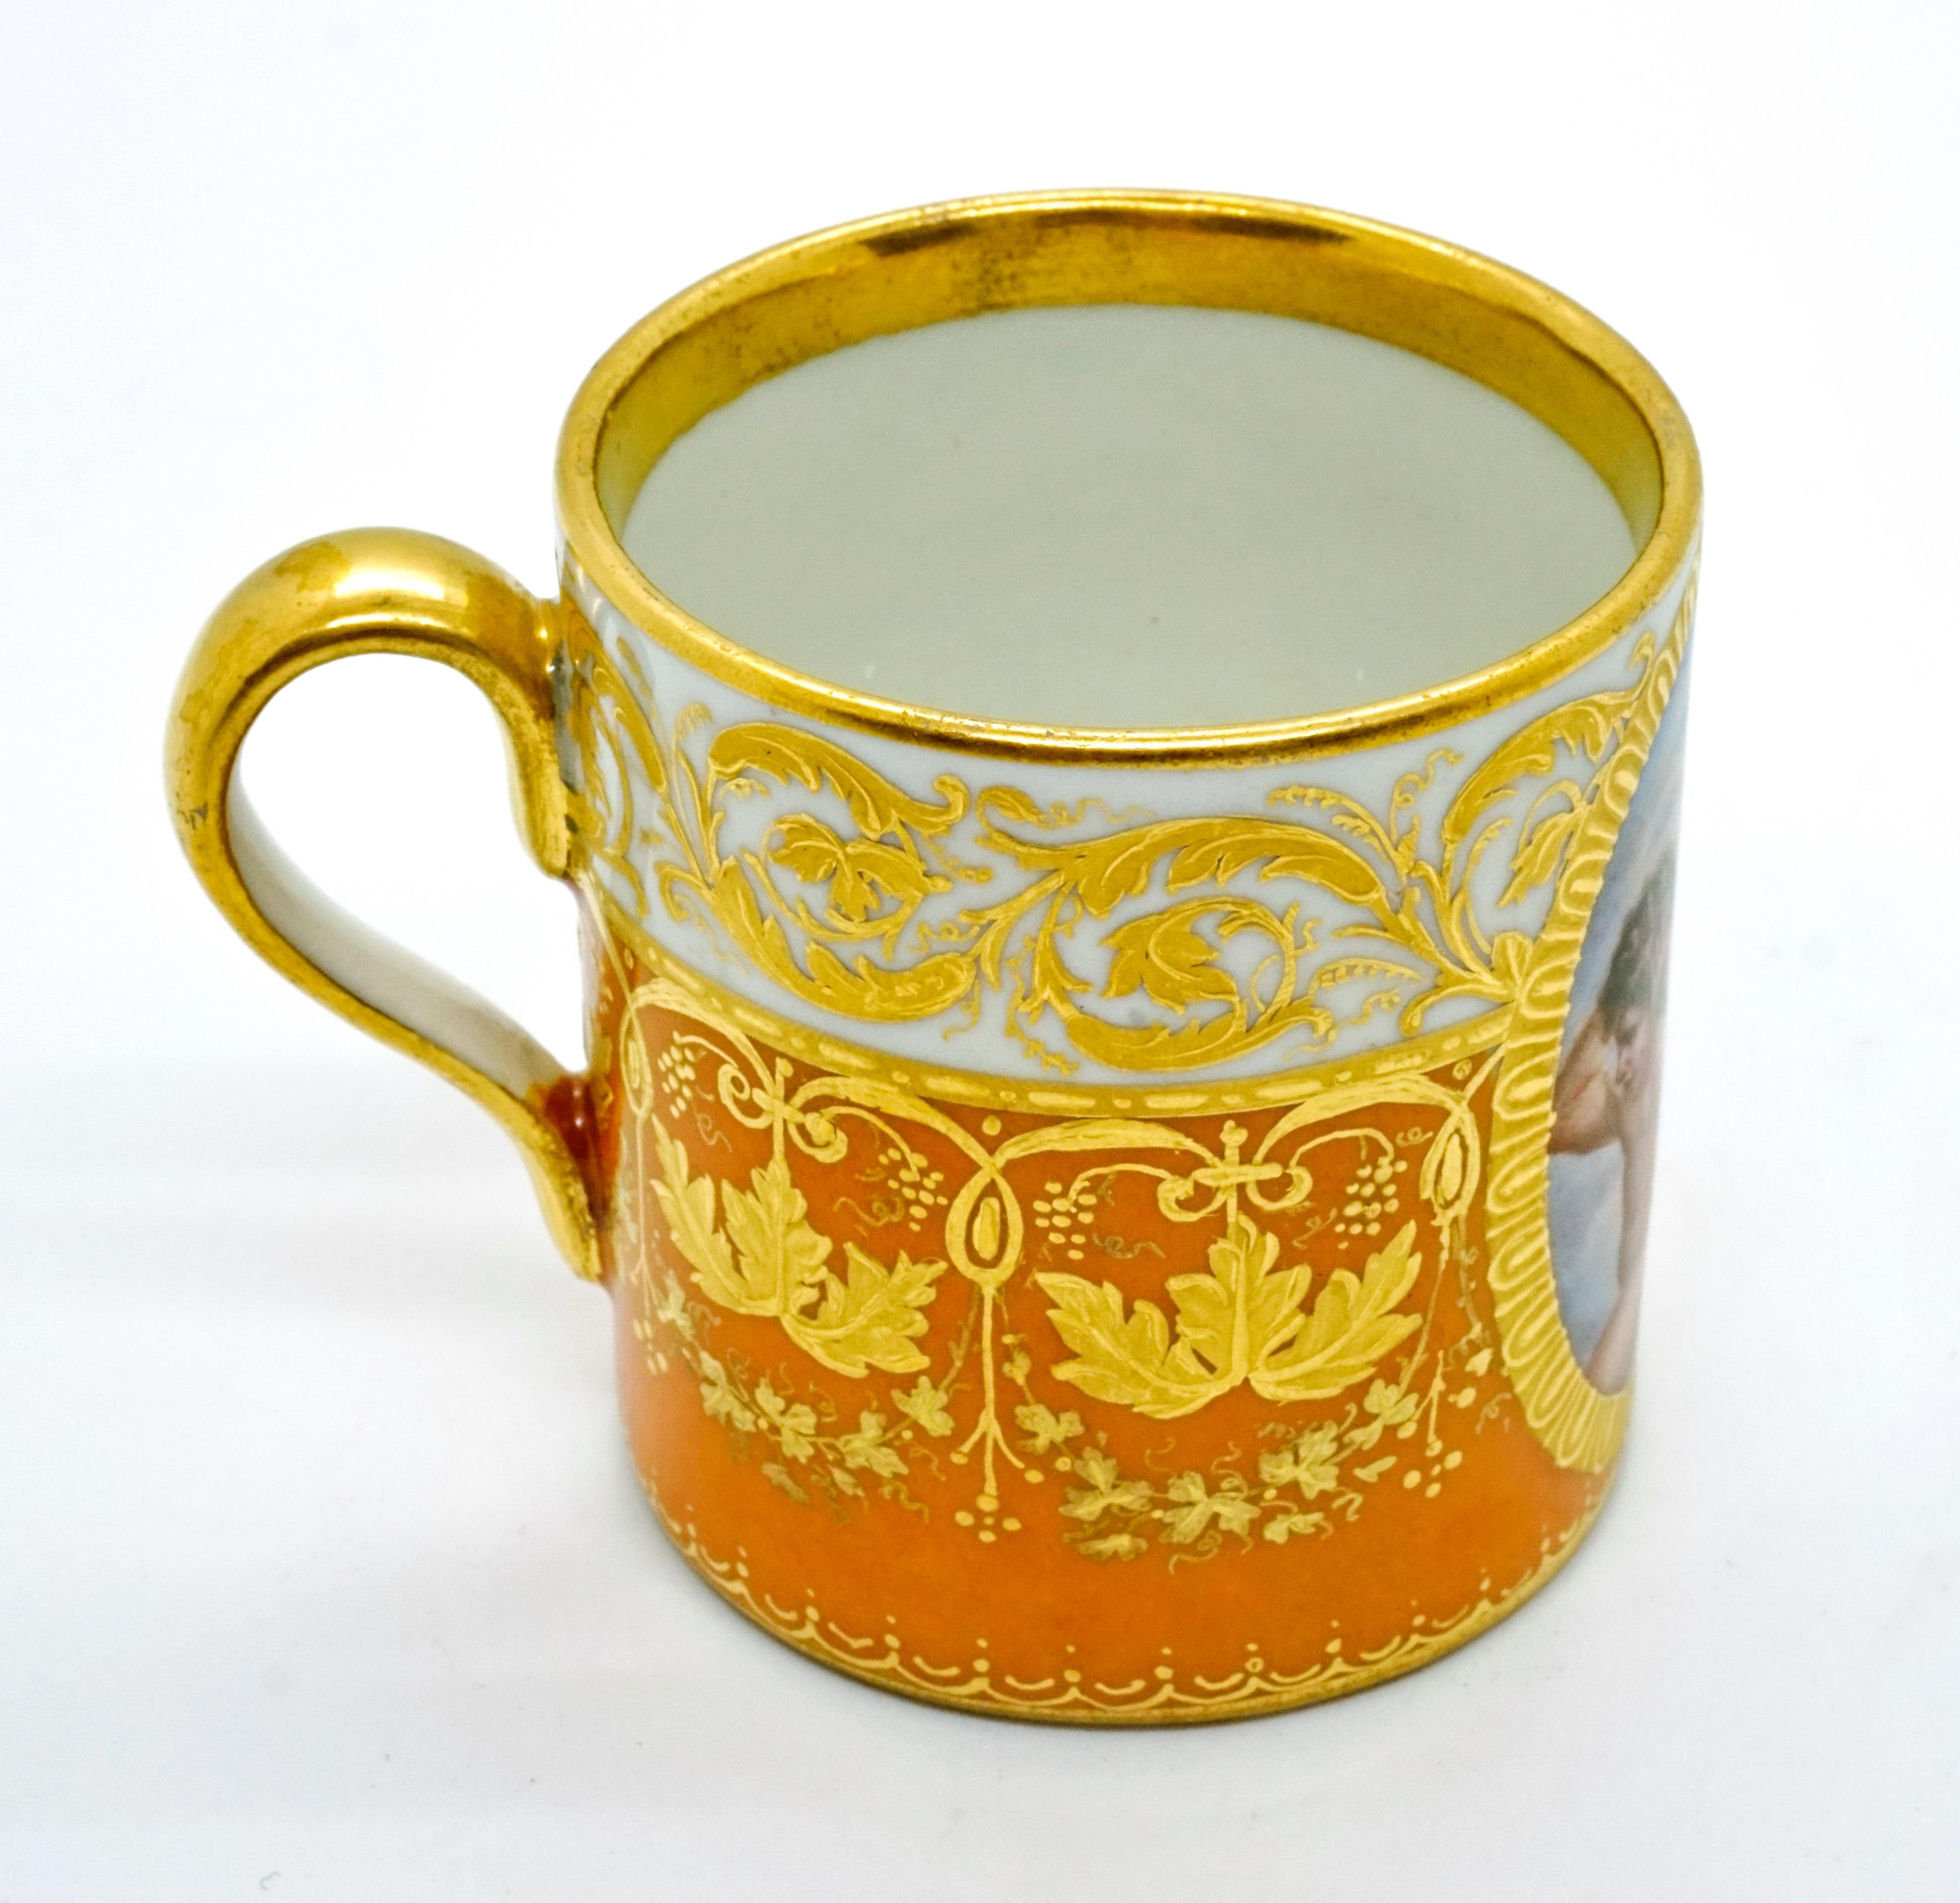 Hand-Crafted Viennese Imperial Porcelain Collecting Cup Yellow and Gold with Cupids, 1825